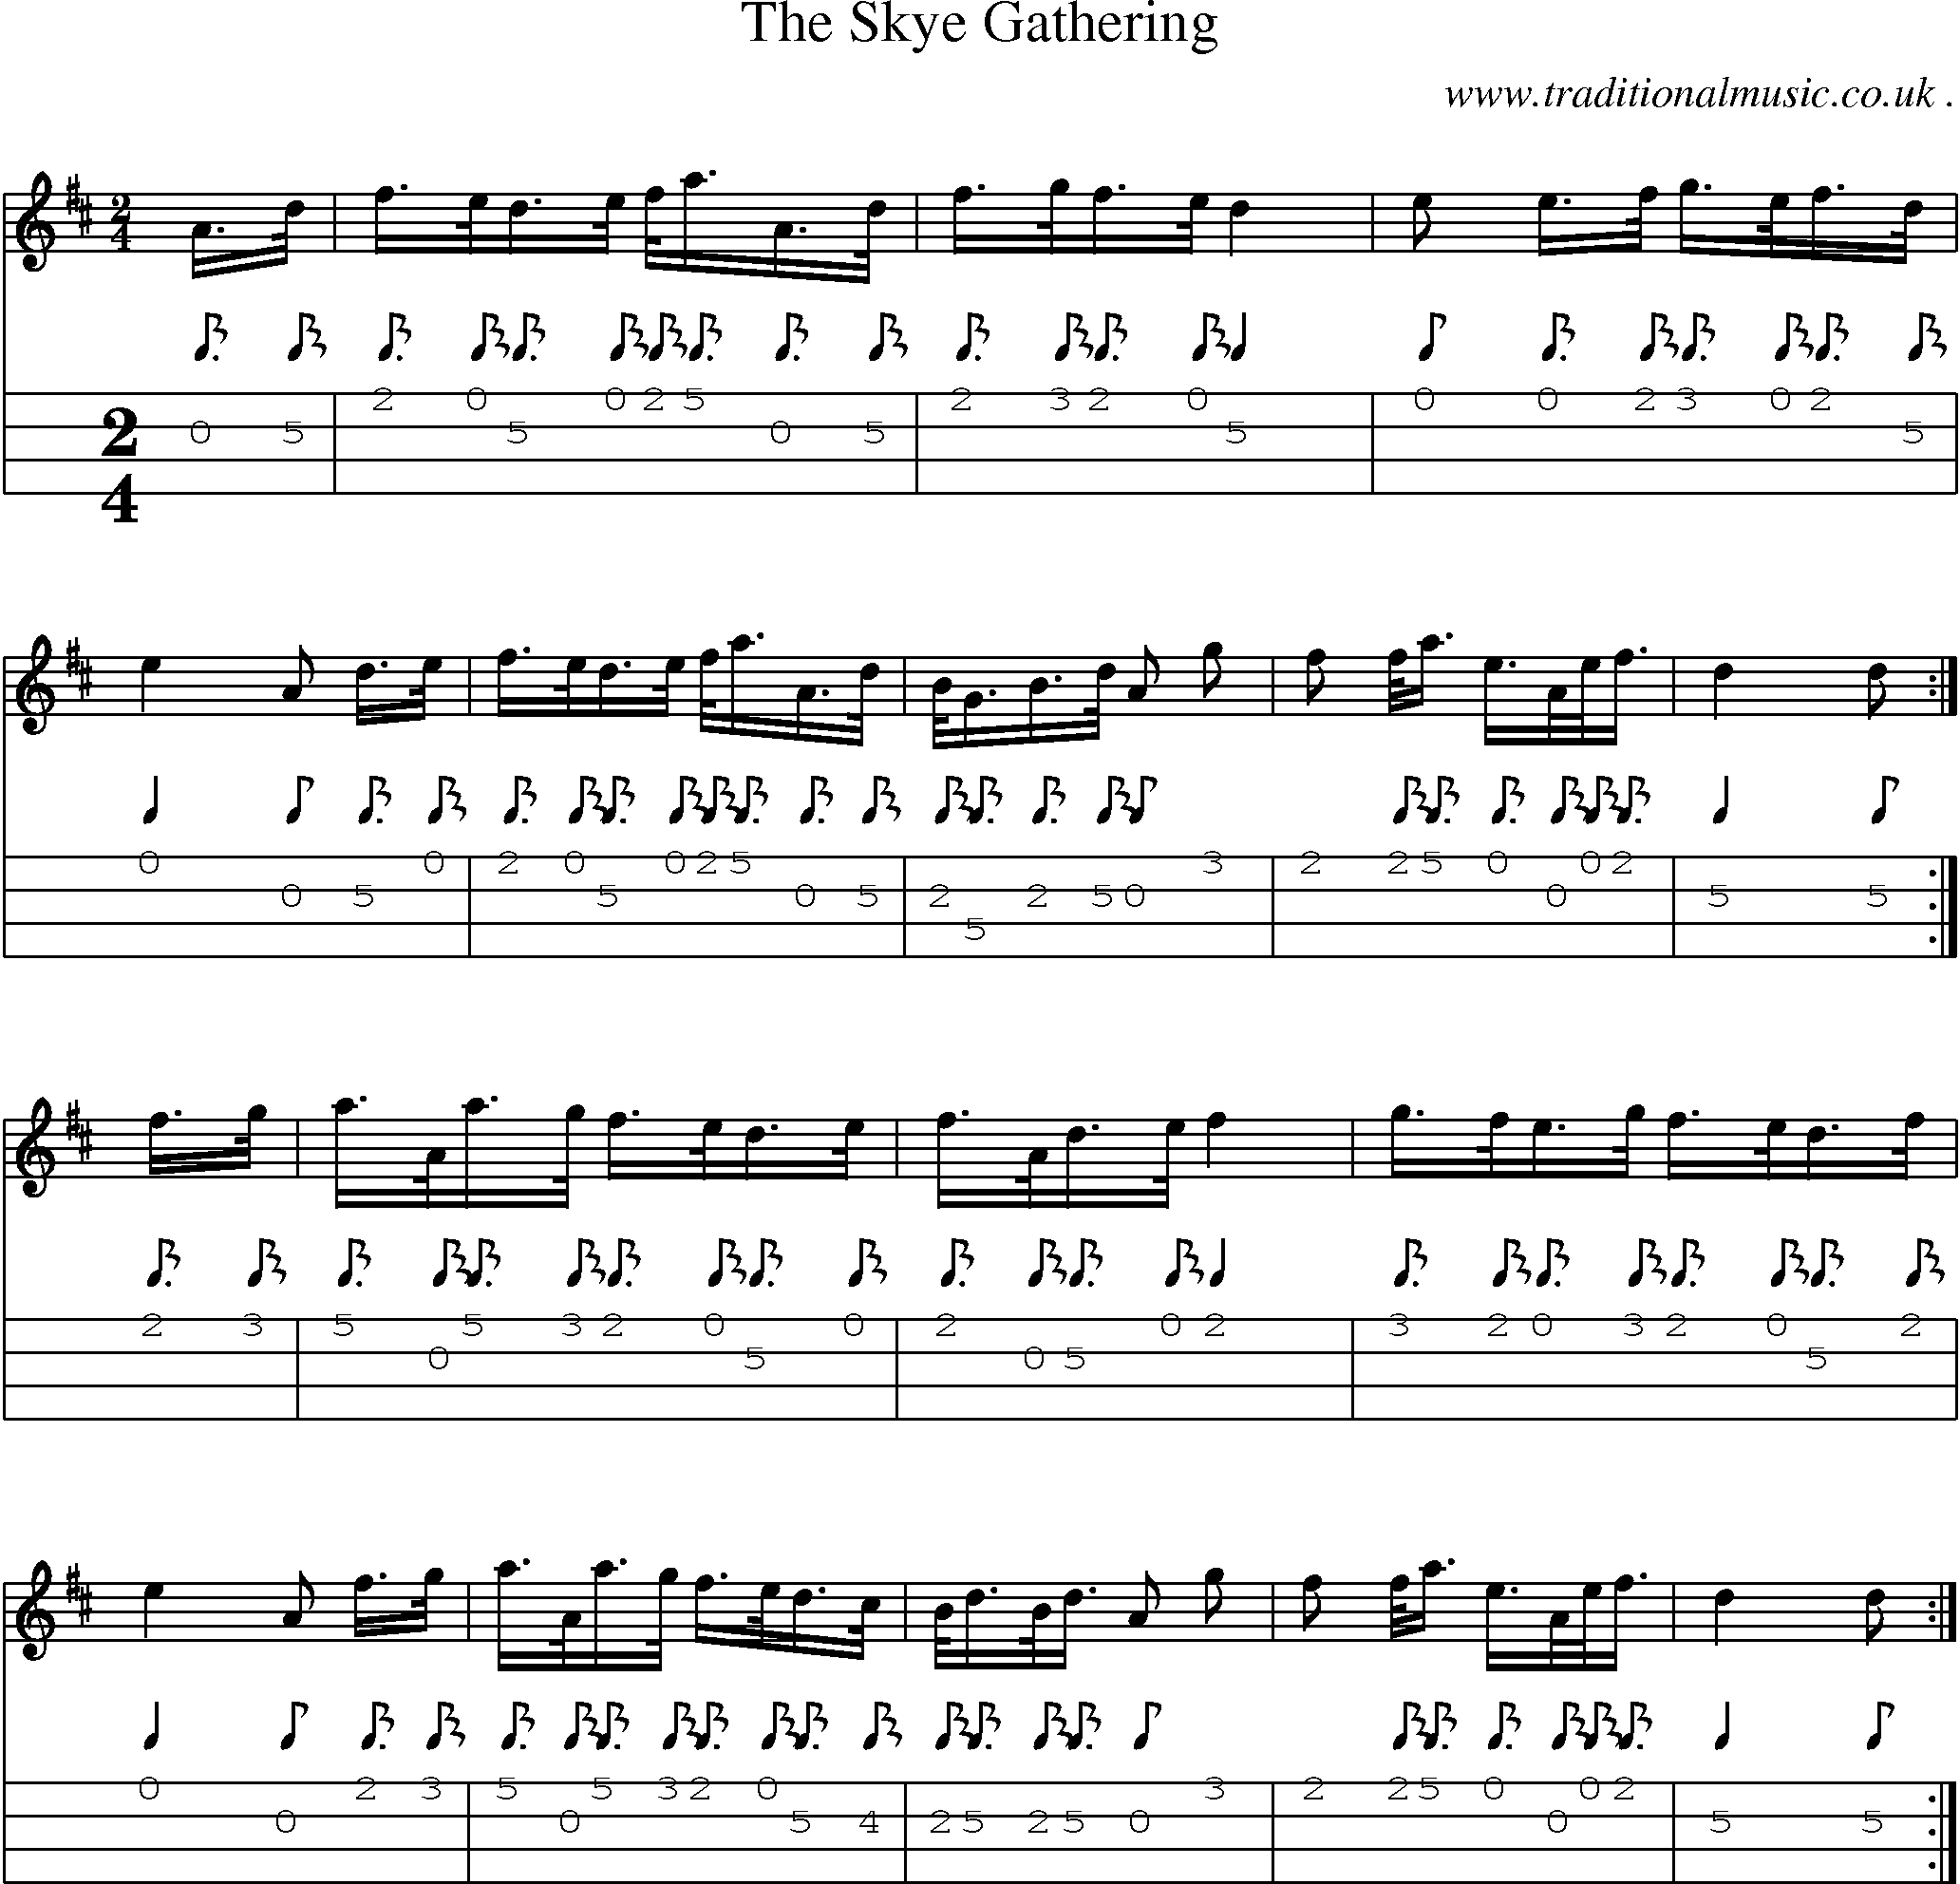 Sheet-music  score, Chords and Mandolin Tabs for The Skye Gathering